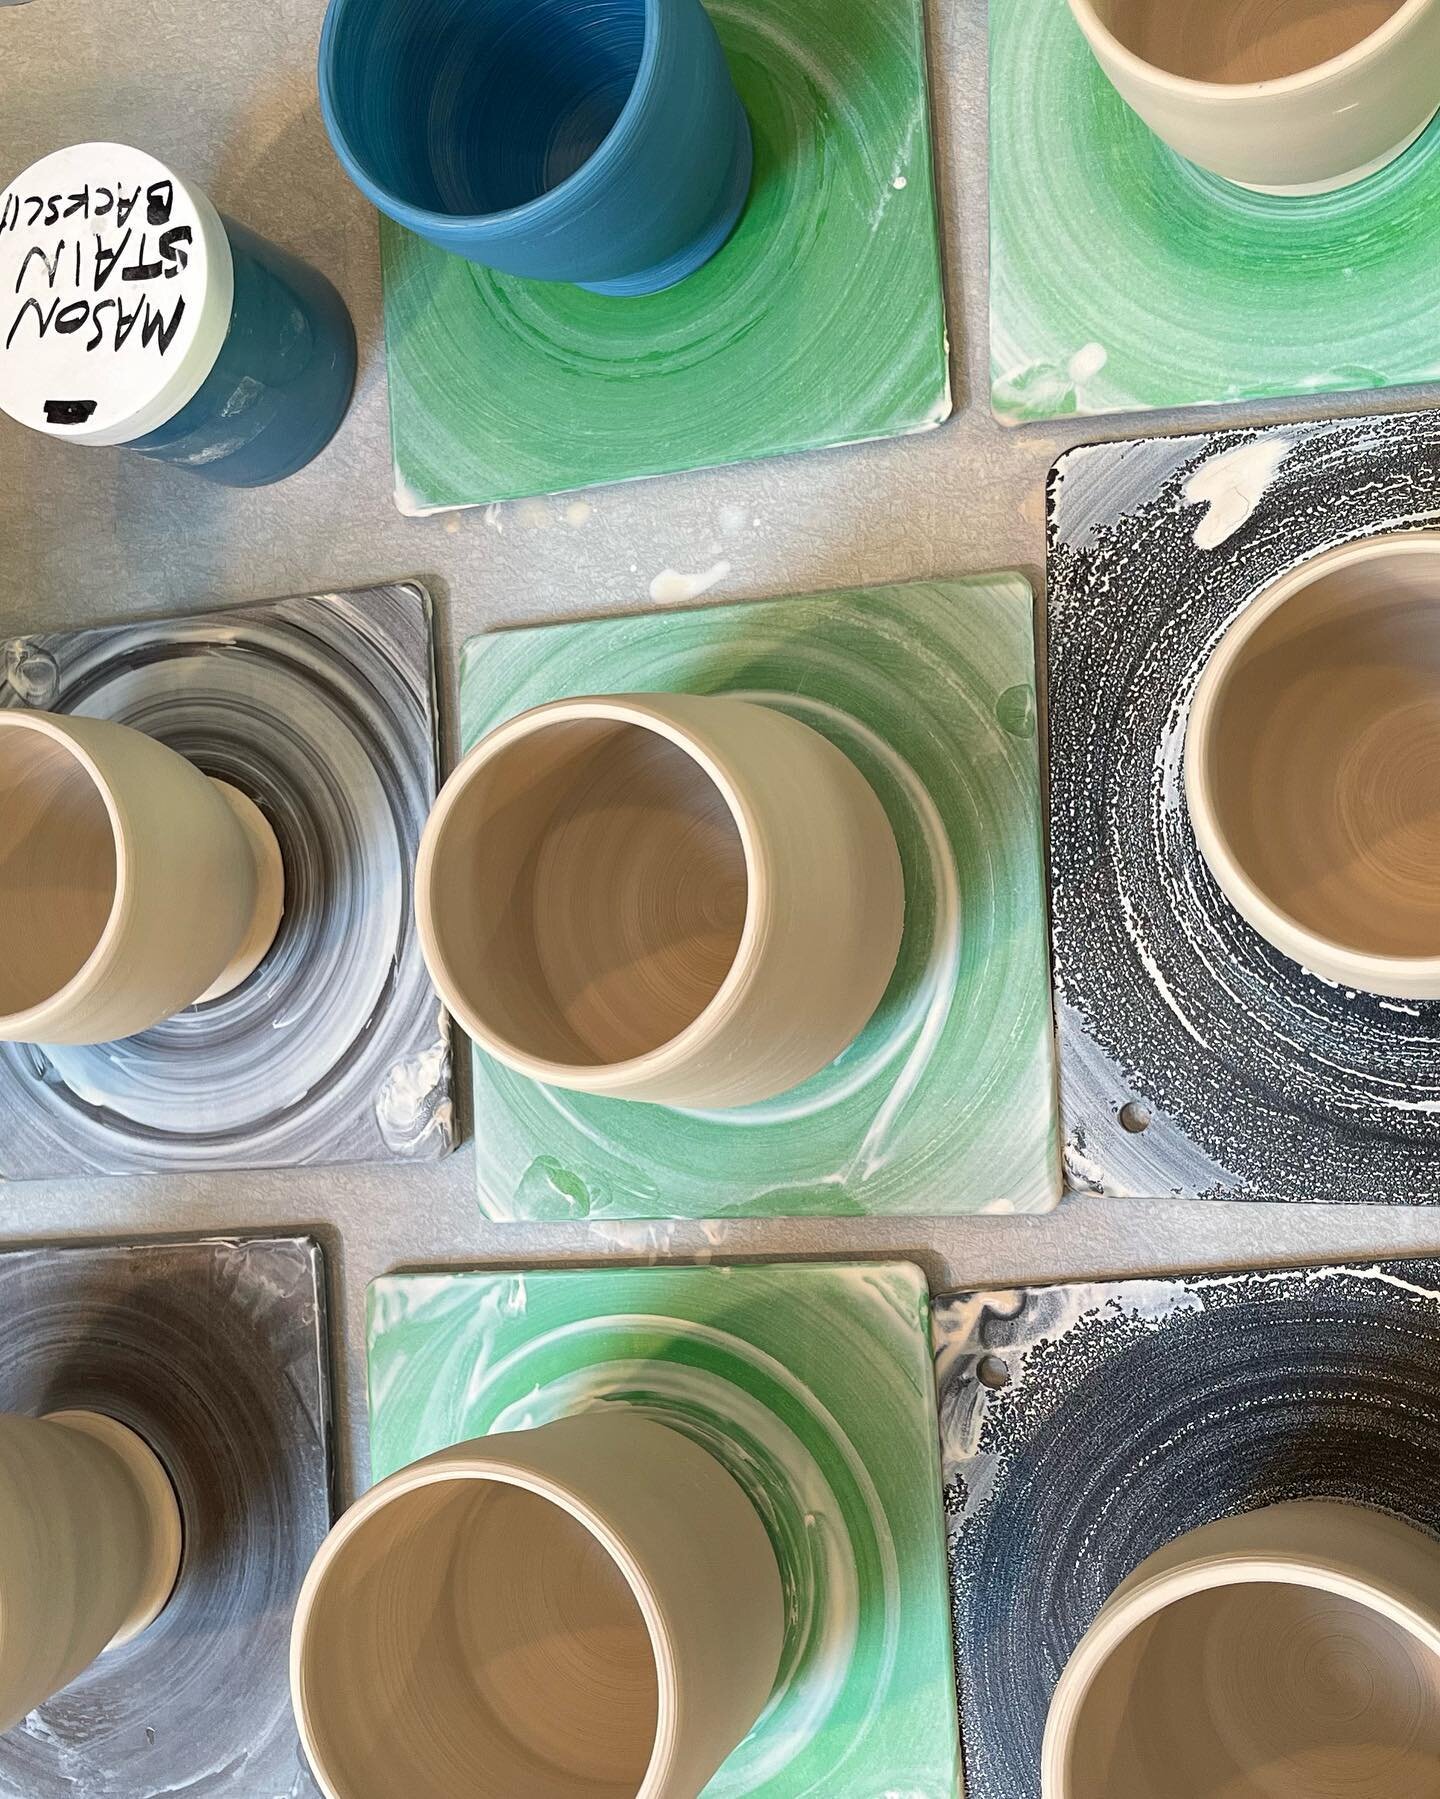 Working on #mugs today for the Art &amp; Roses show in Boise on June 4. Hope to see you there! 
@artandrosesboise 
#boisemudworks 
#wip 
#pottery 
#madeinboise